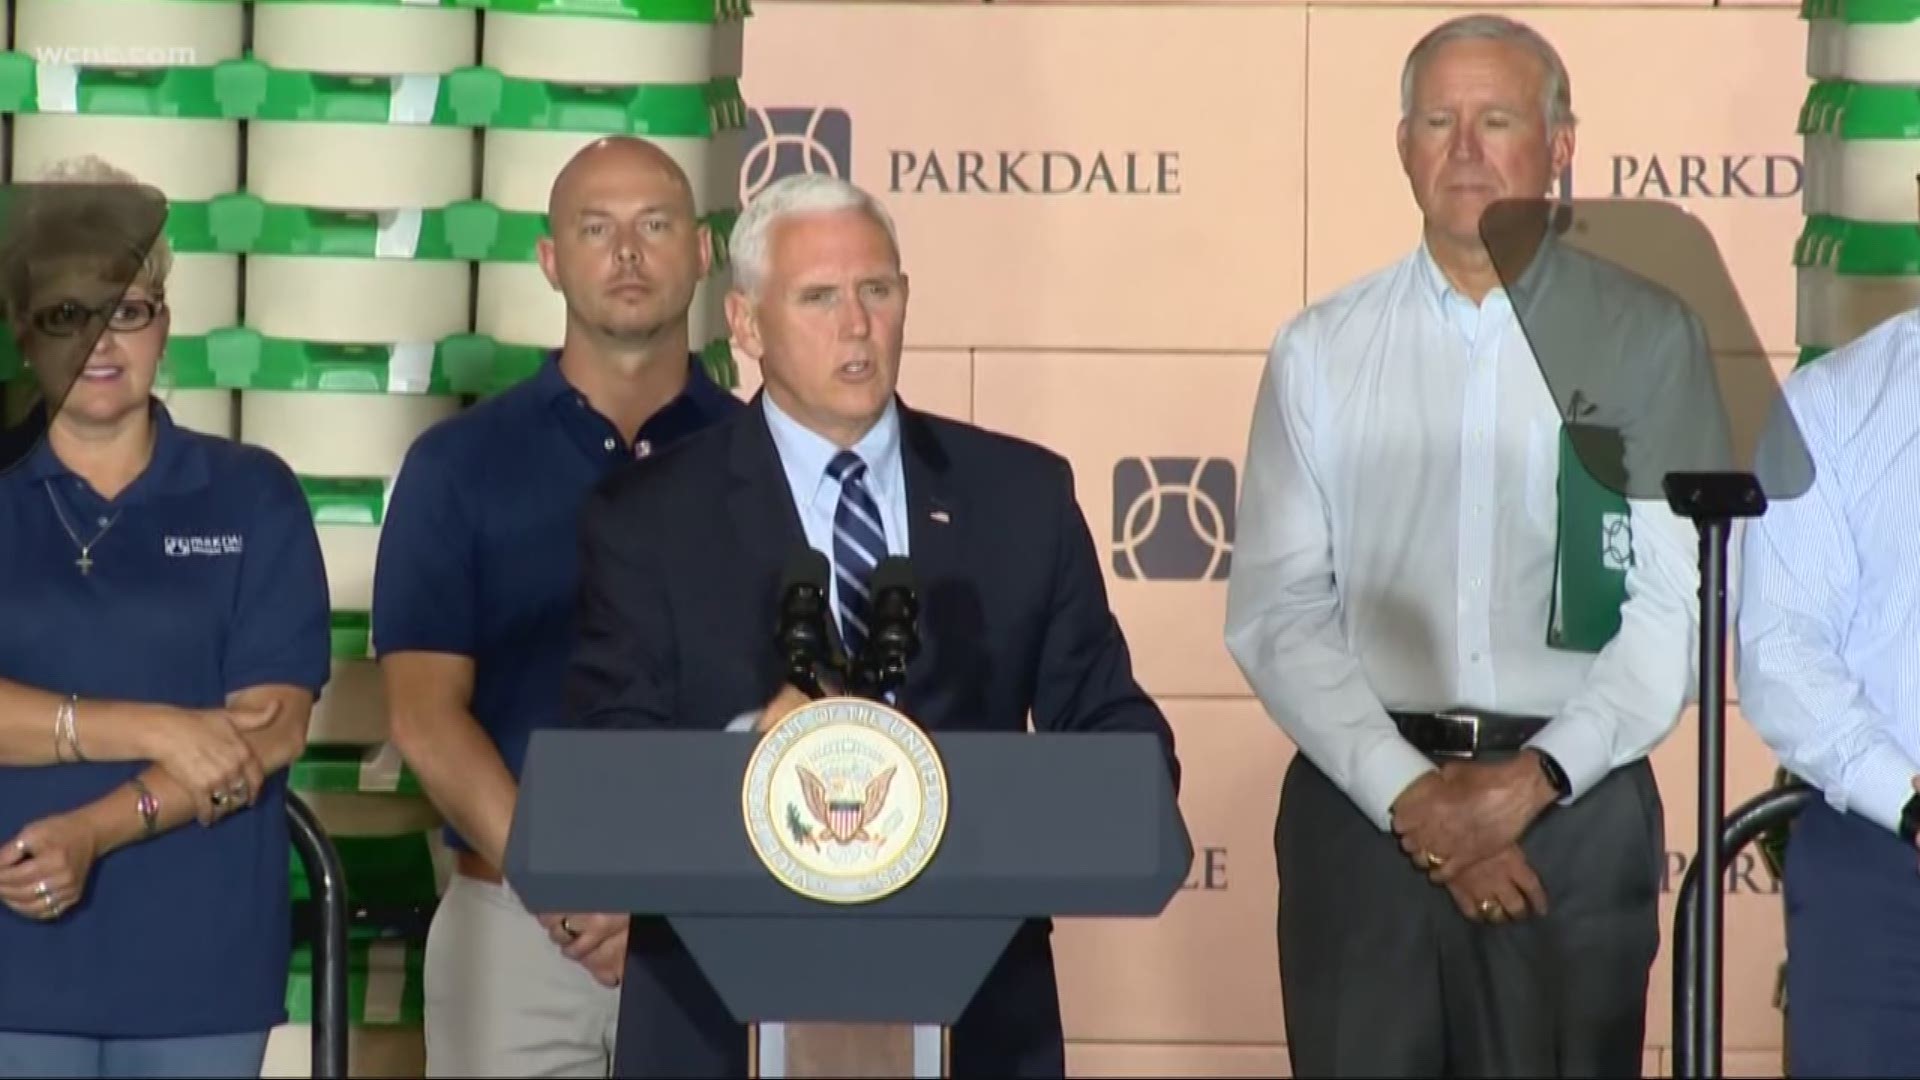 Pence told workers at Parkdale Mills the administration had kept its promise of bringing back manufacturing jobs.